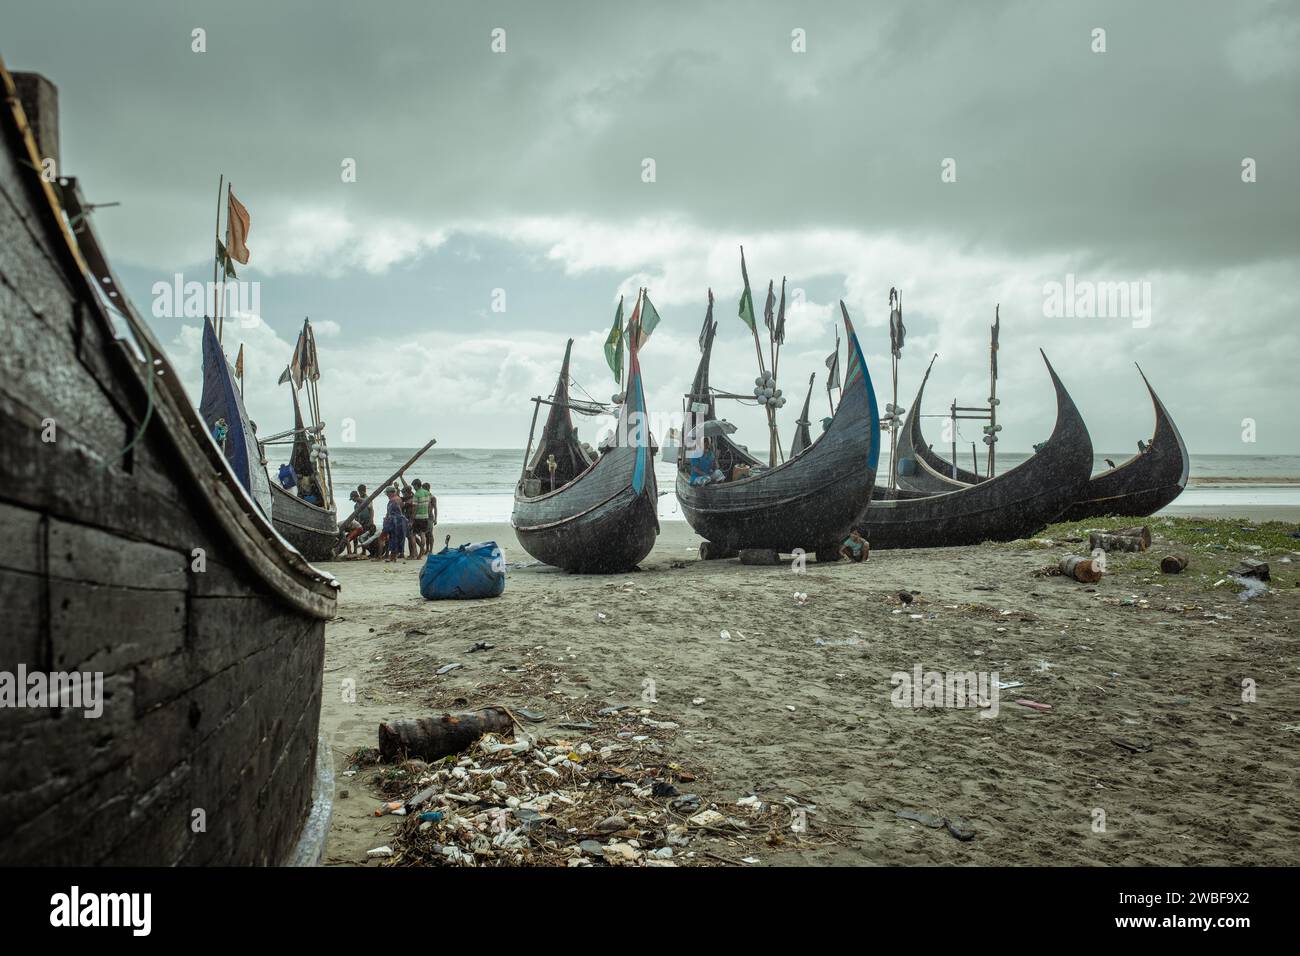 Fishing boats on the beach during a monsoon shower, Cox's Bazar, Bangladesh Stock Photo